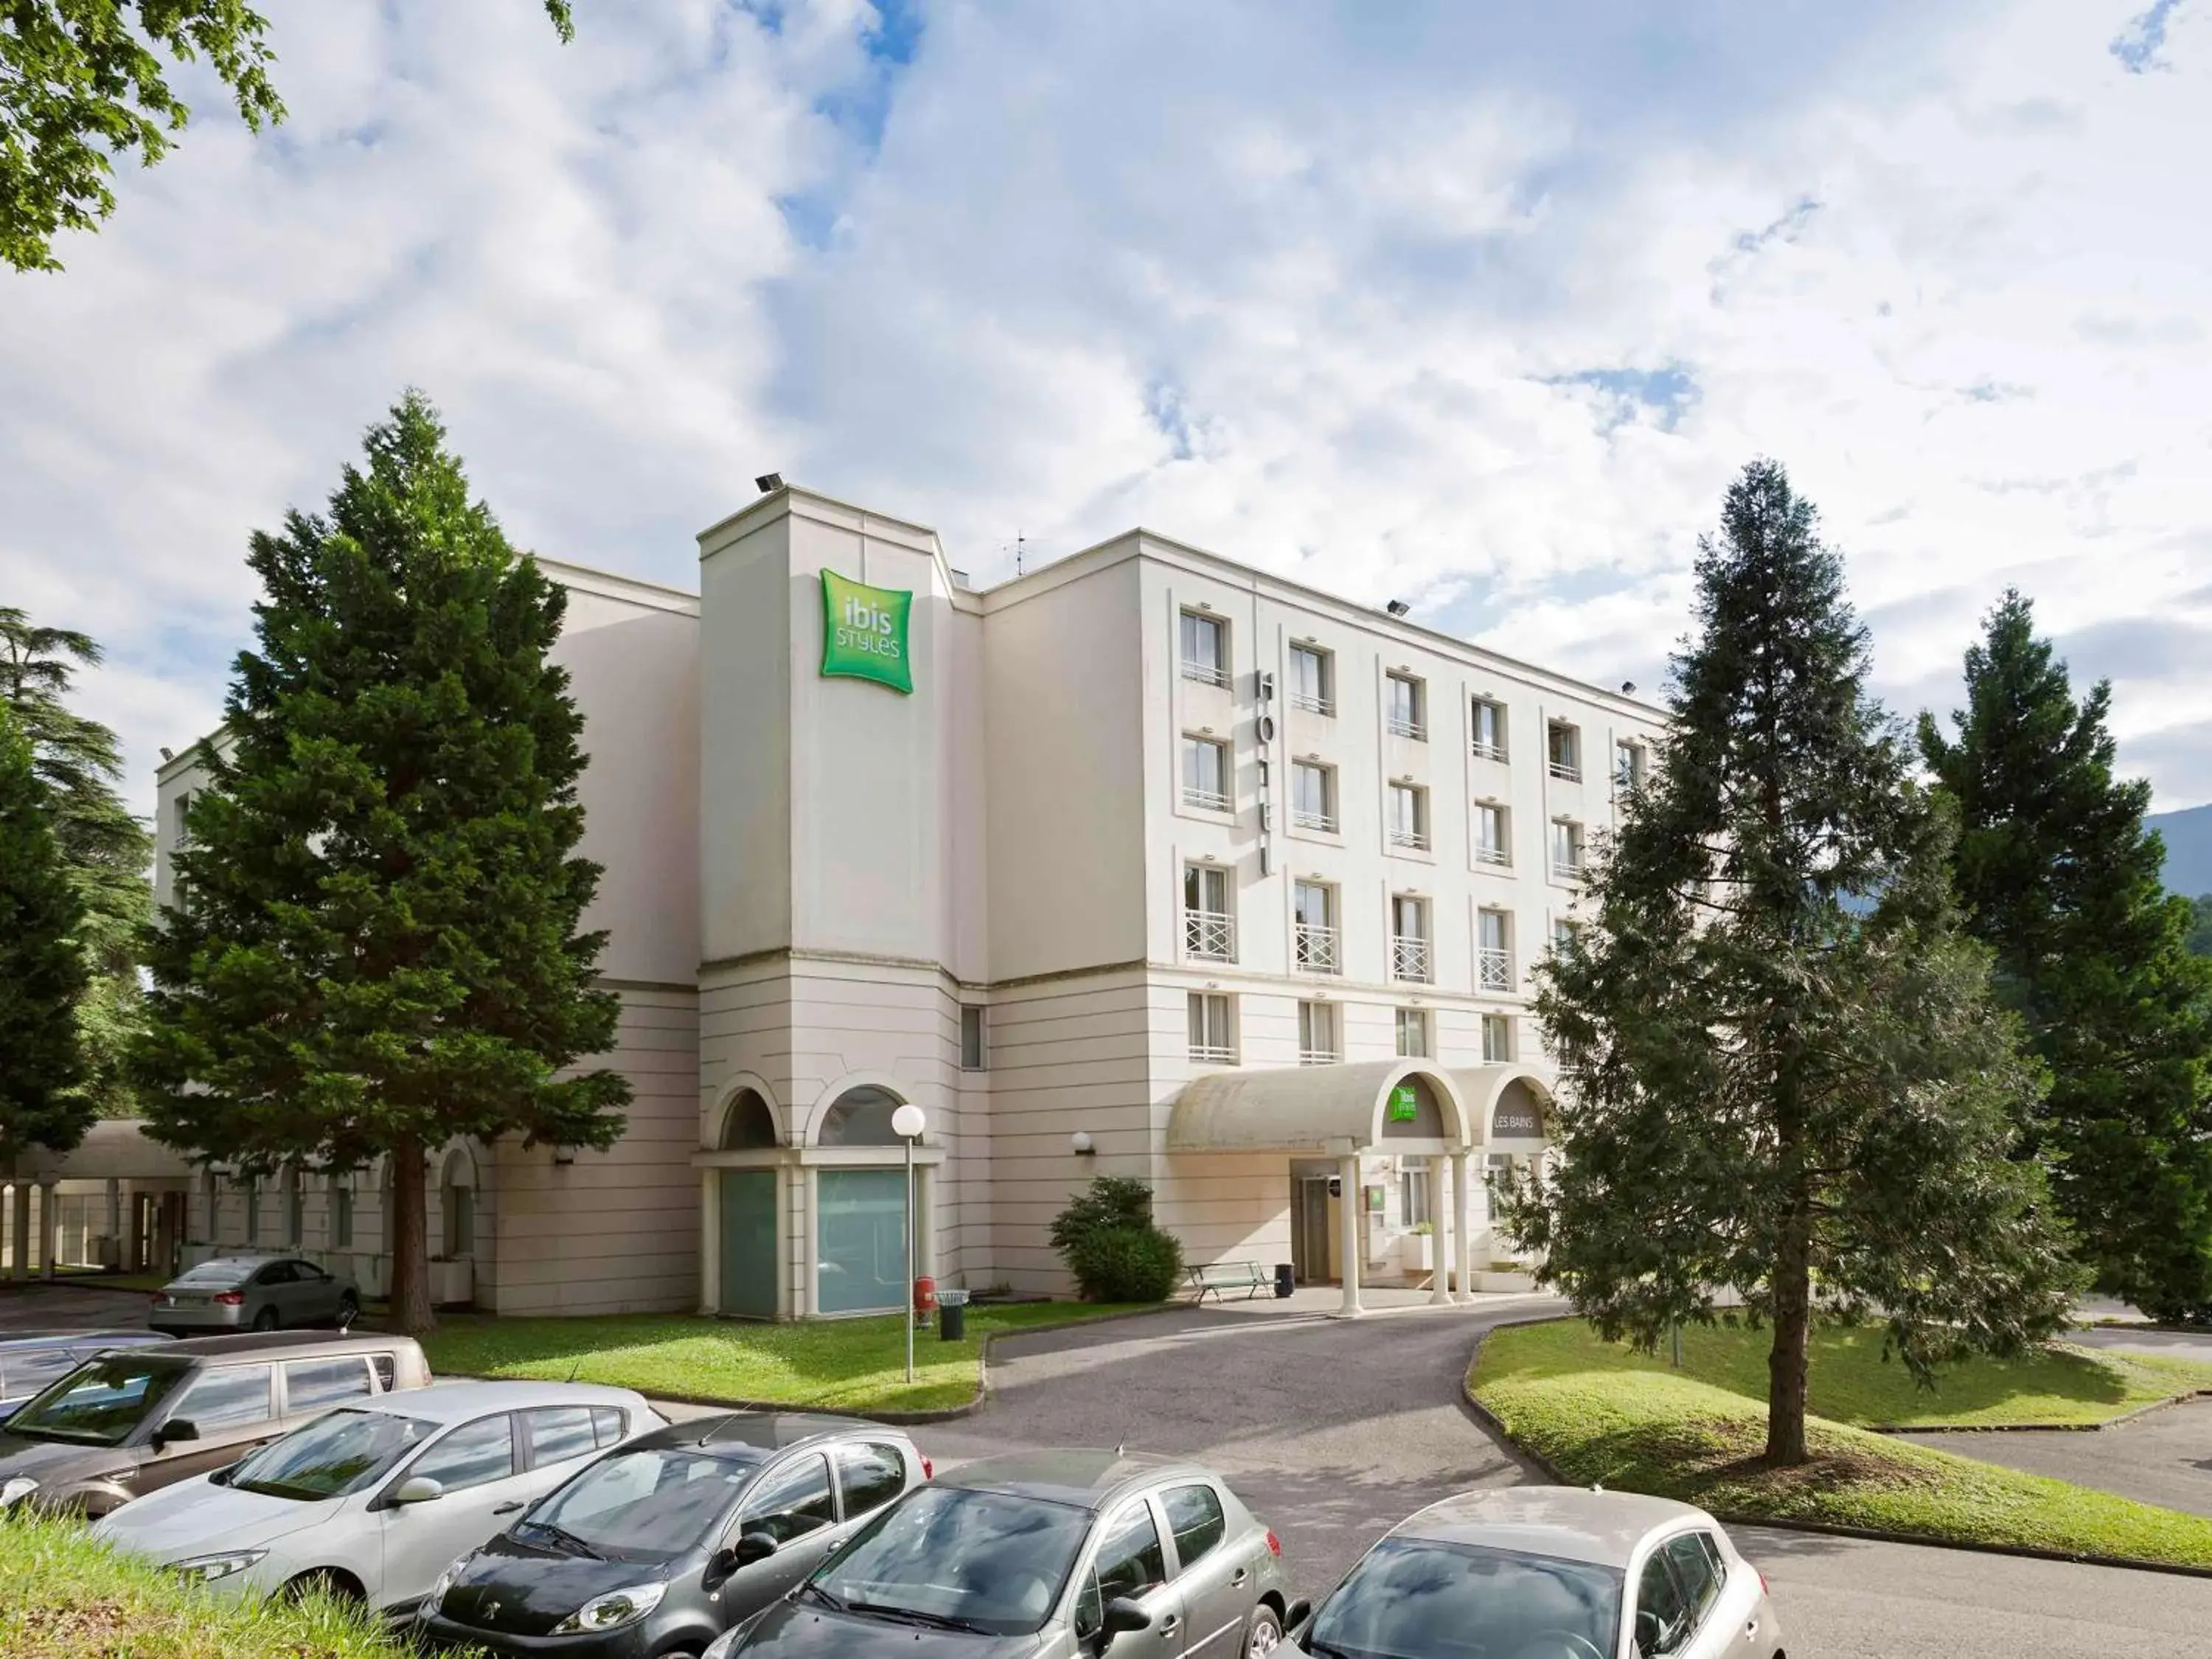 On site, Property Building in ibis Styles Aix les Bains